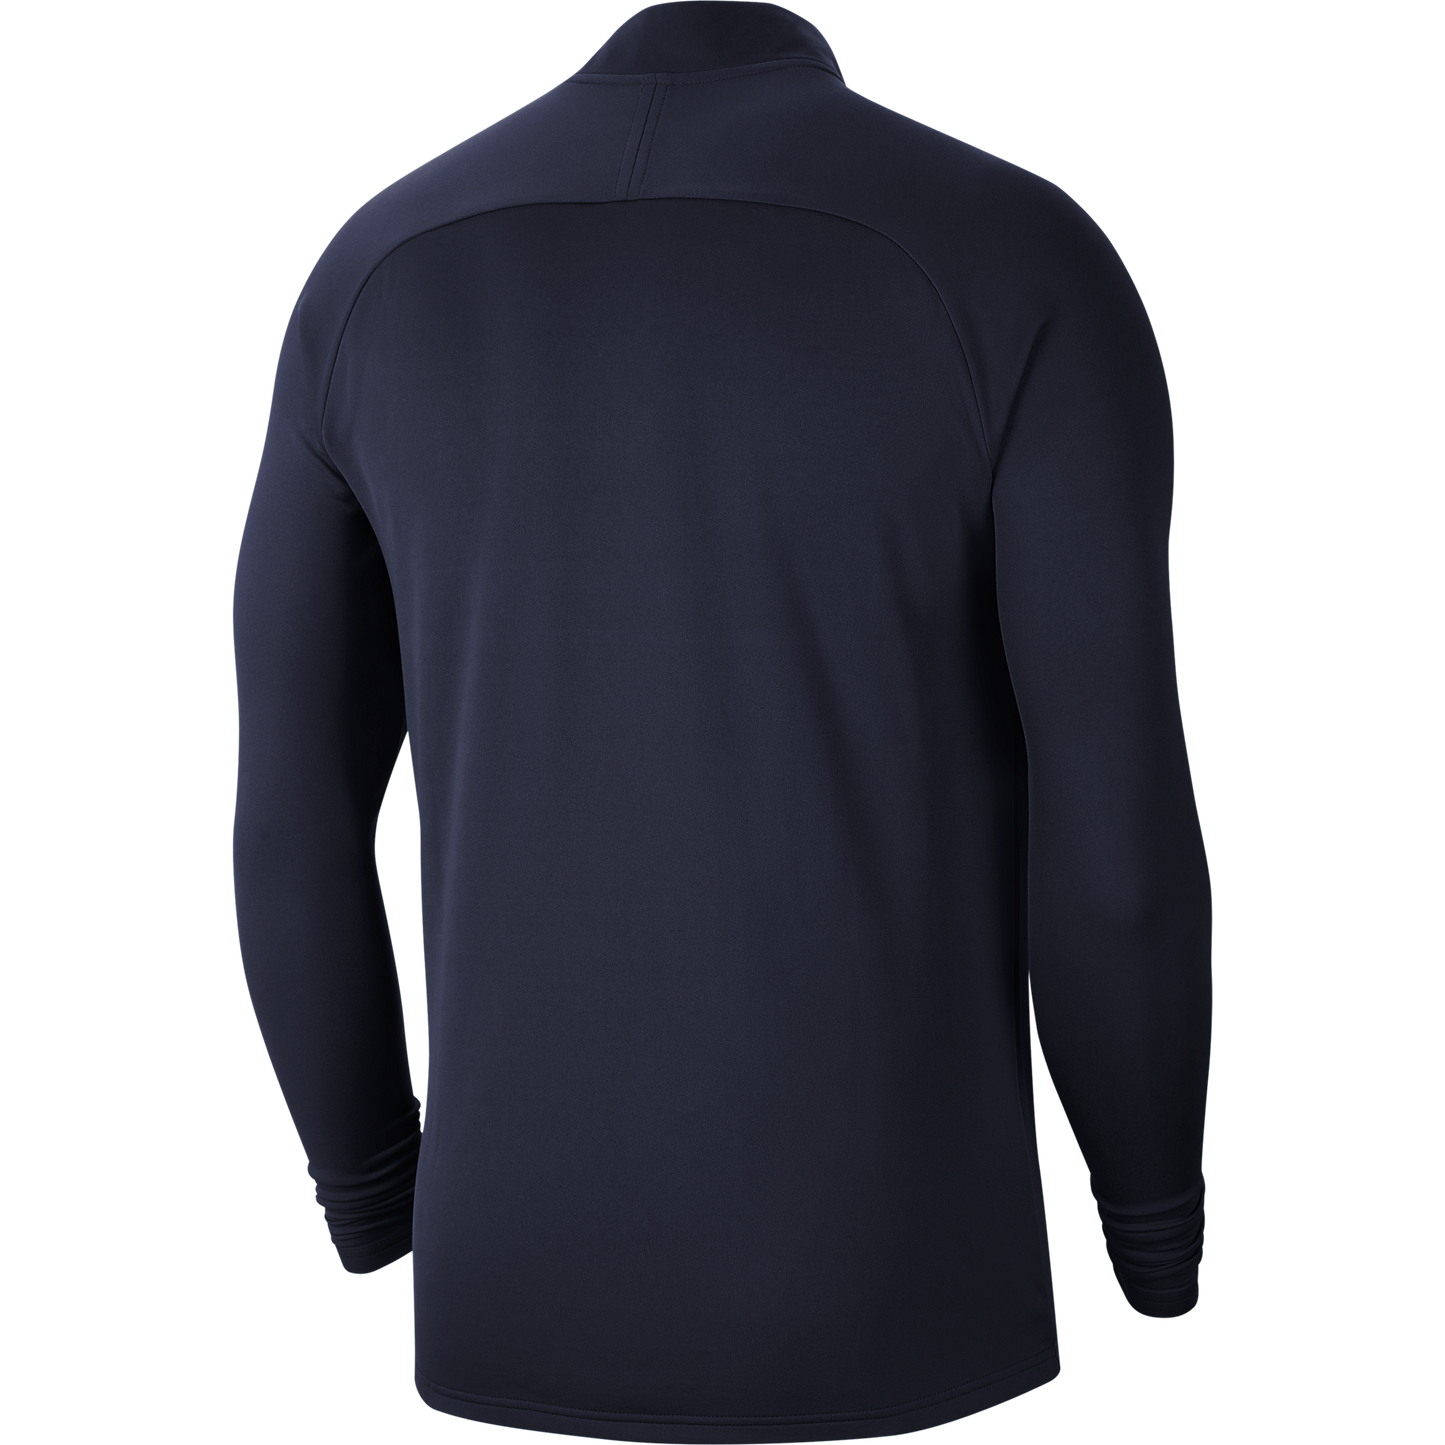 NOMADS UNITED AFC  NIKE DRILL TOP - MEN'S